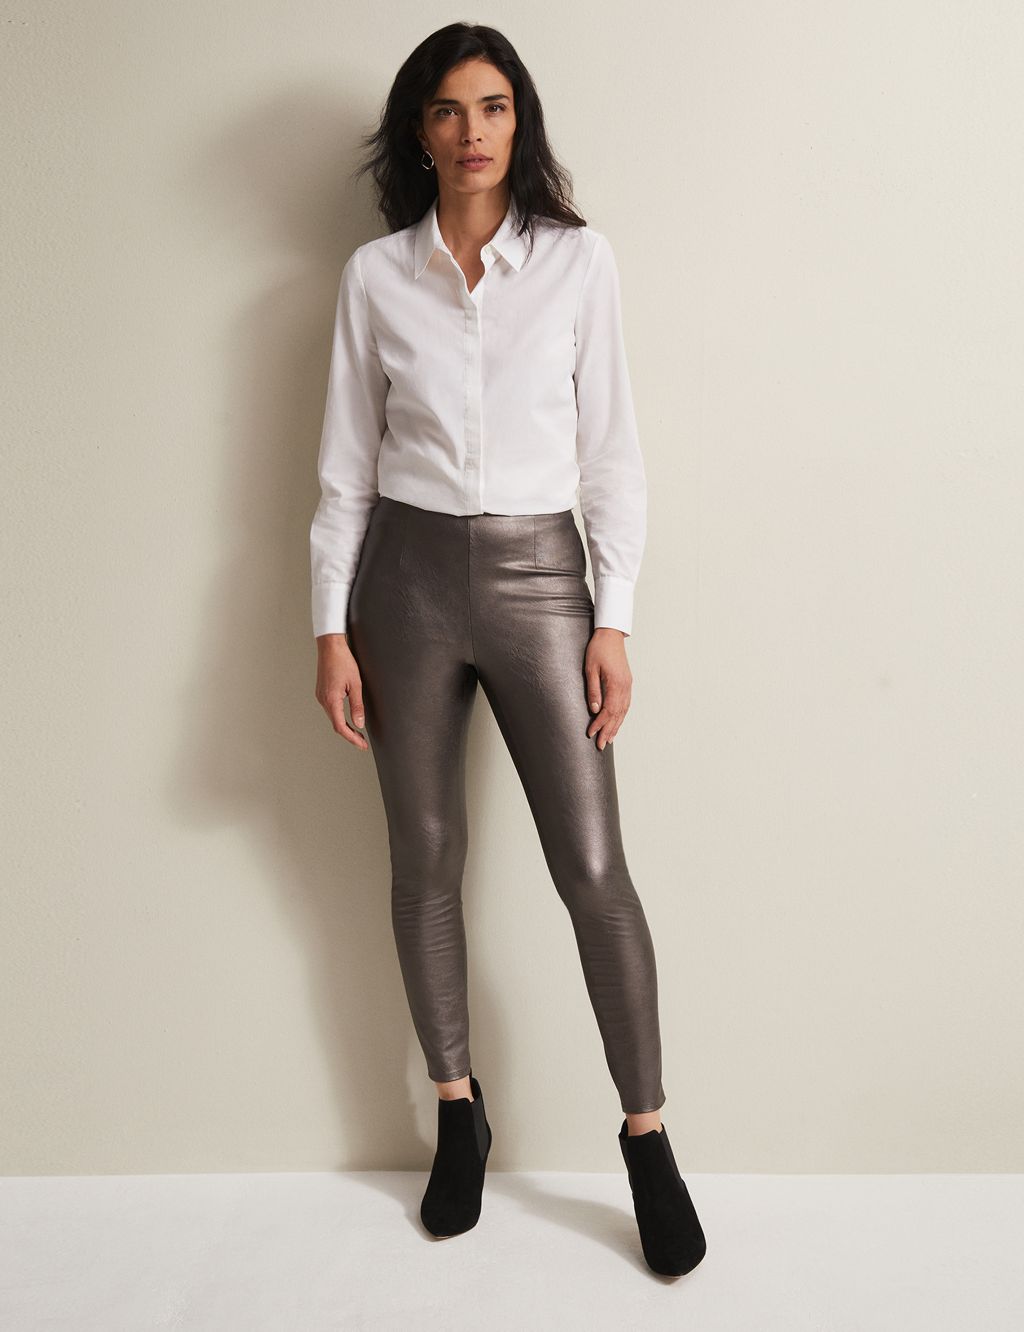 https://asset1.cxnmarksandspencer.com/is/image/mands/Faux-Leather-Metallic-High-Waisted-Jeggings/SD_10_T83_7341W_VF_X_EC_0?$PDP_IMAGEGRID$&wid=1024&qlt=80